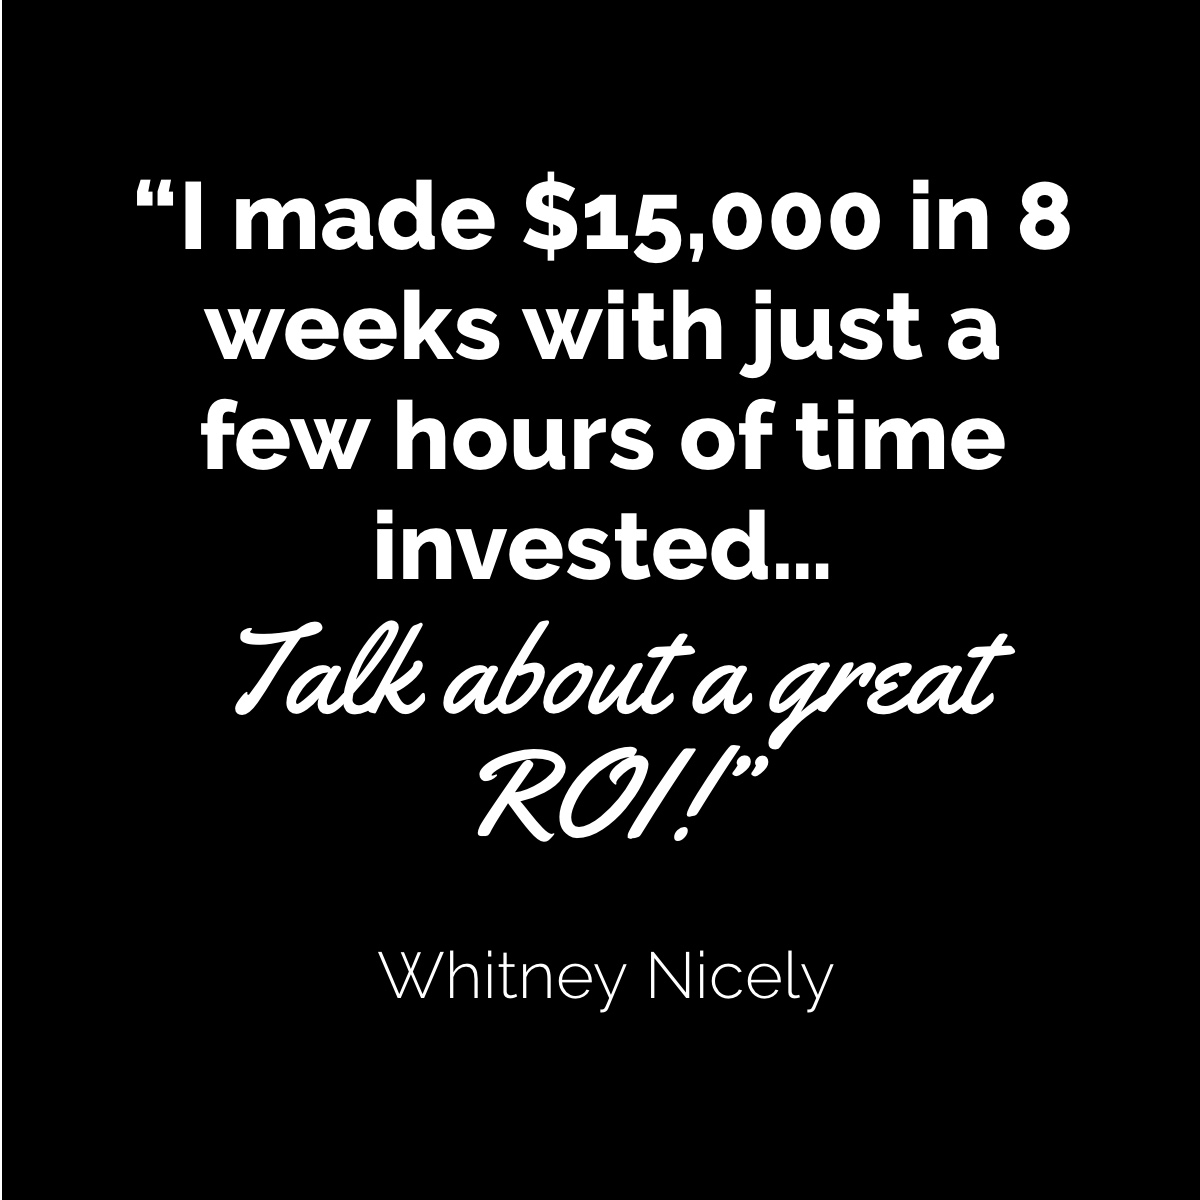 Whitney Nicely Quote: "I made $15,000 in 8 weeks with just a few hours of time invested...Talk about a great ROI."